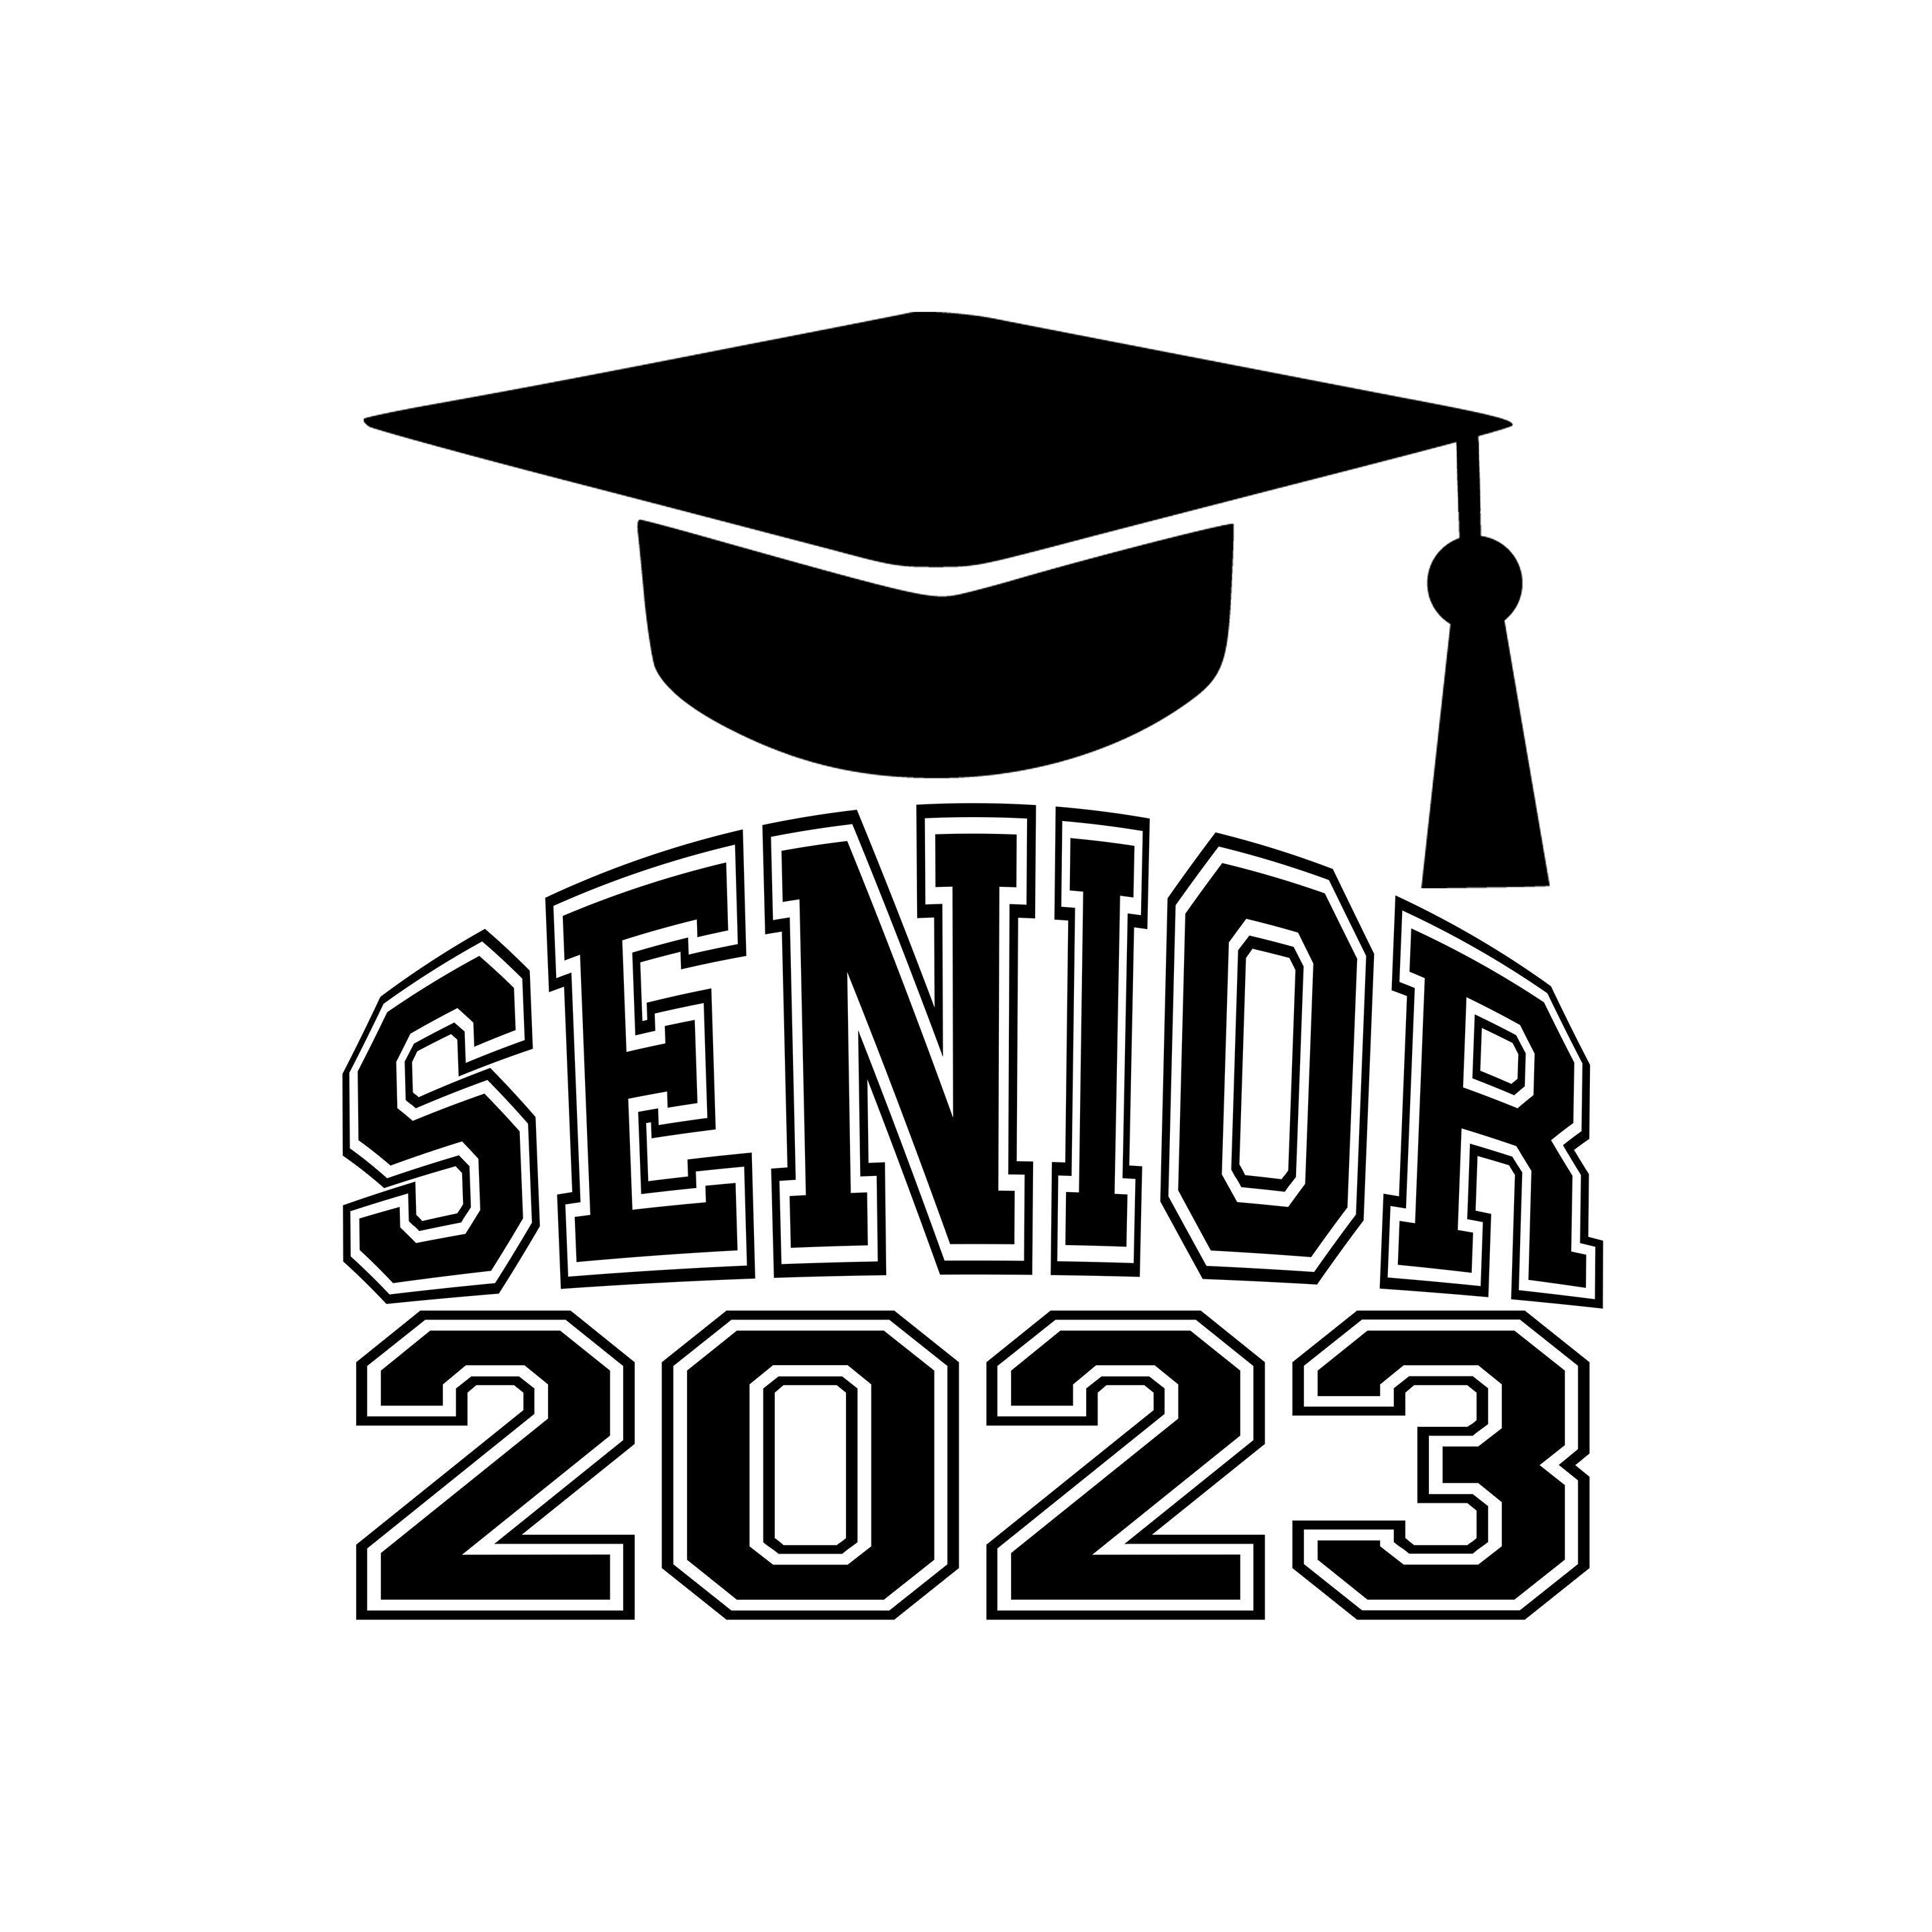 class of 2023 printable sign